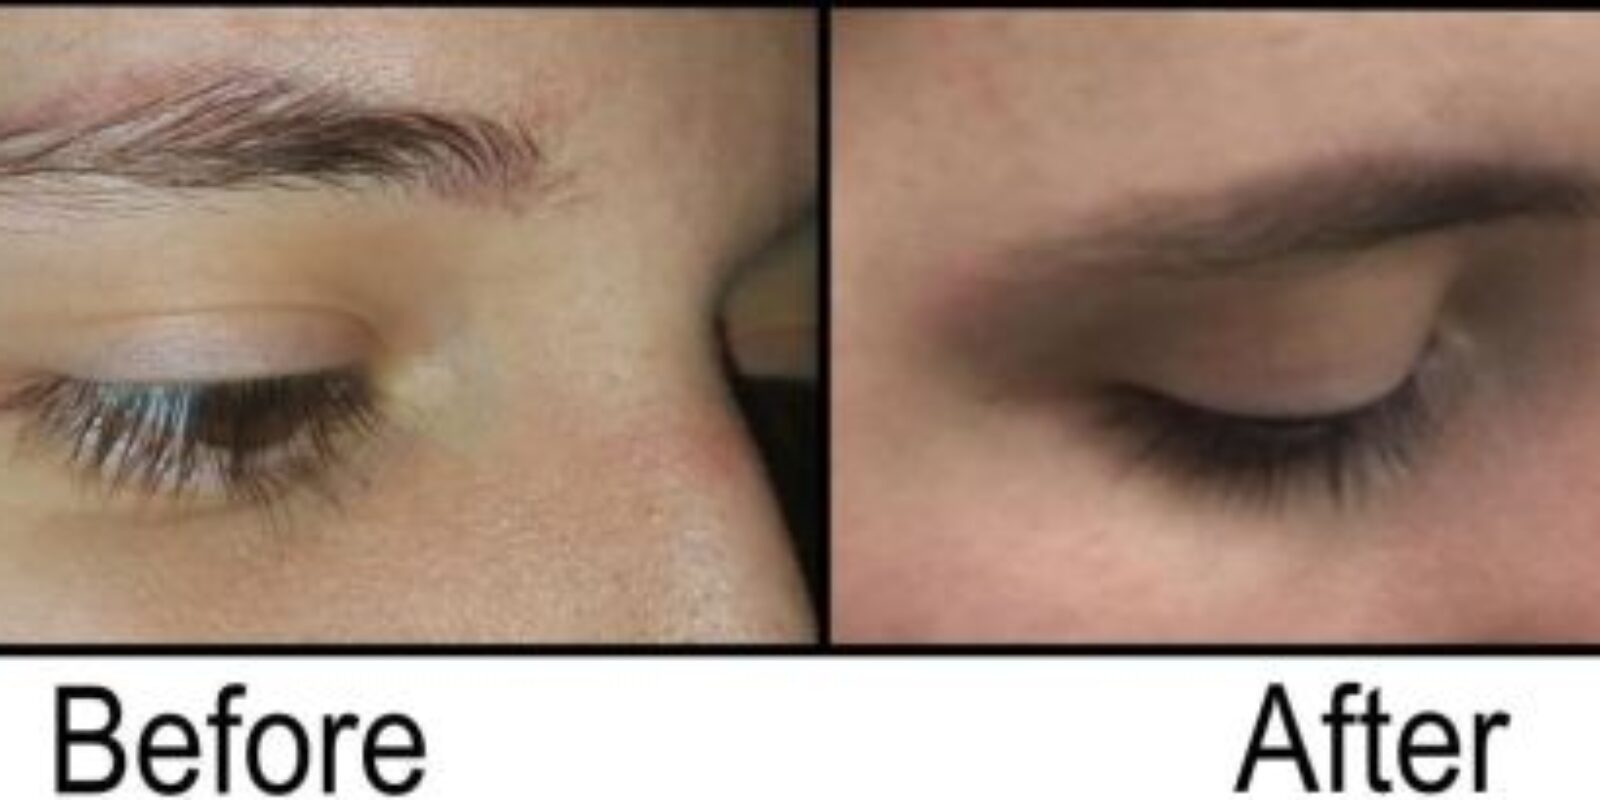 What are the Different Options to Remove Eyebrow Tattoos